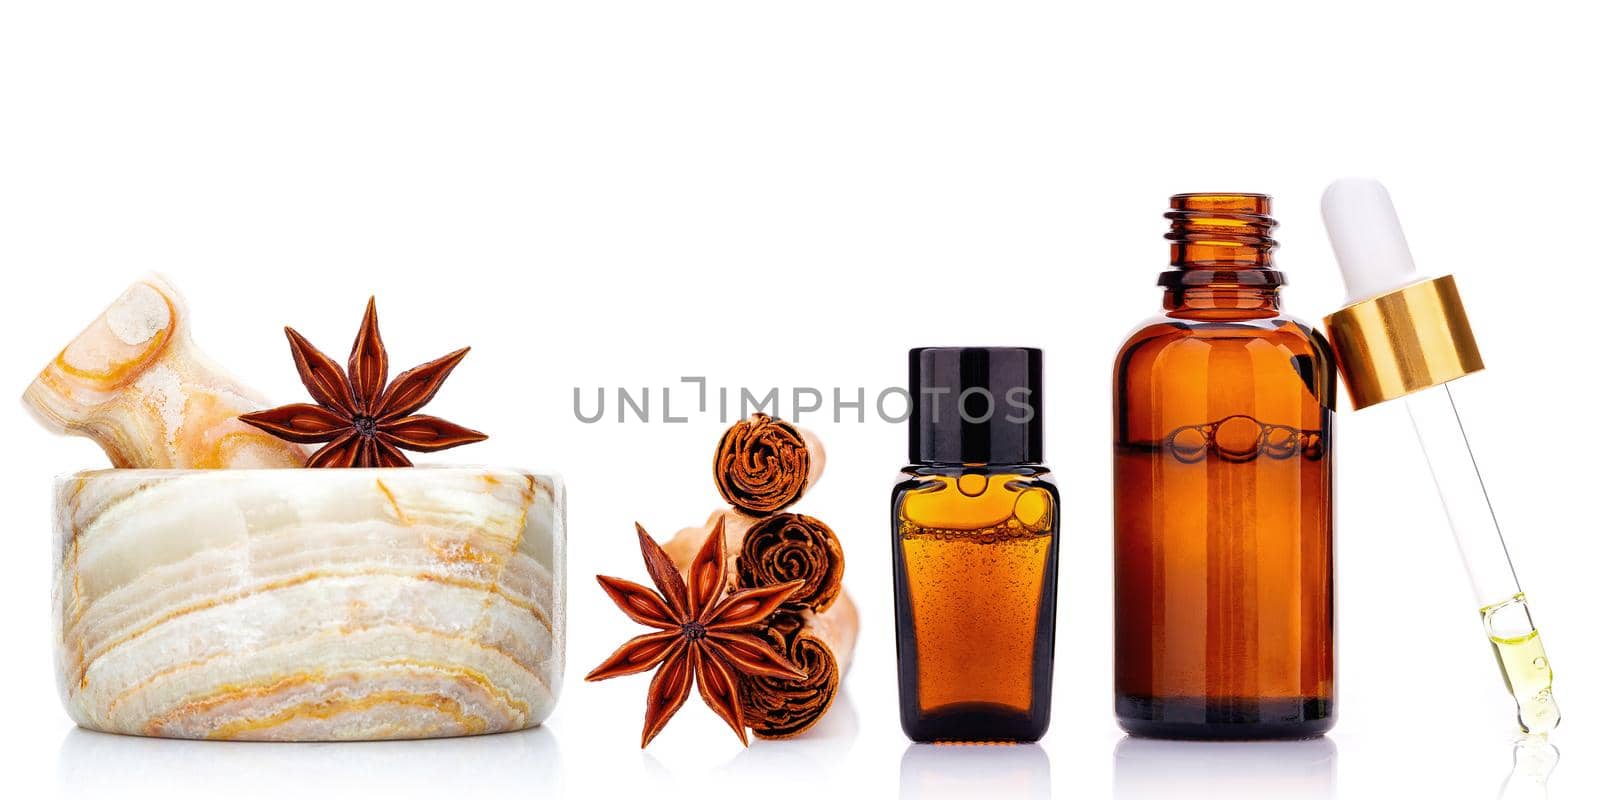 Cinnamon essential oil bottle with Ceylon cinnamon sticks and anise star isolated on white background .
